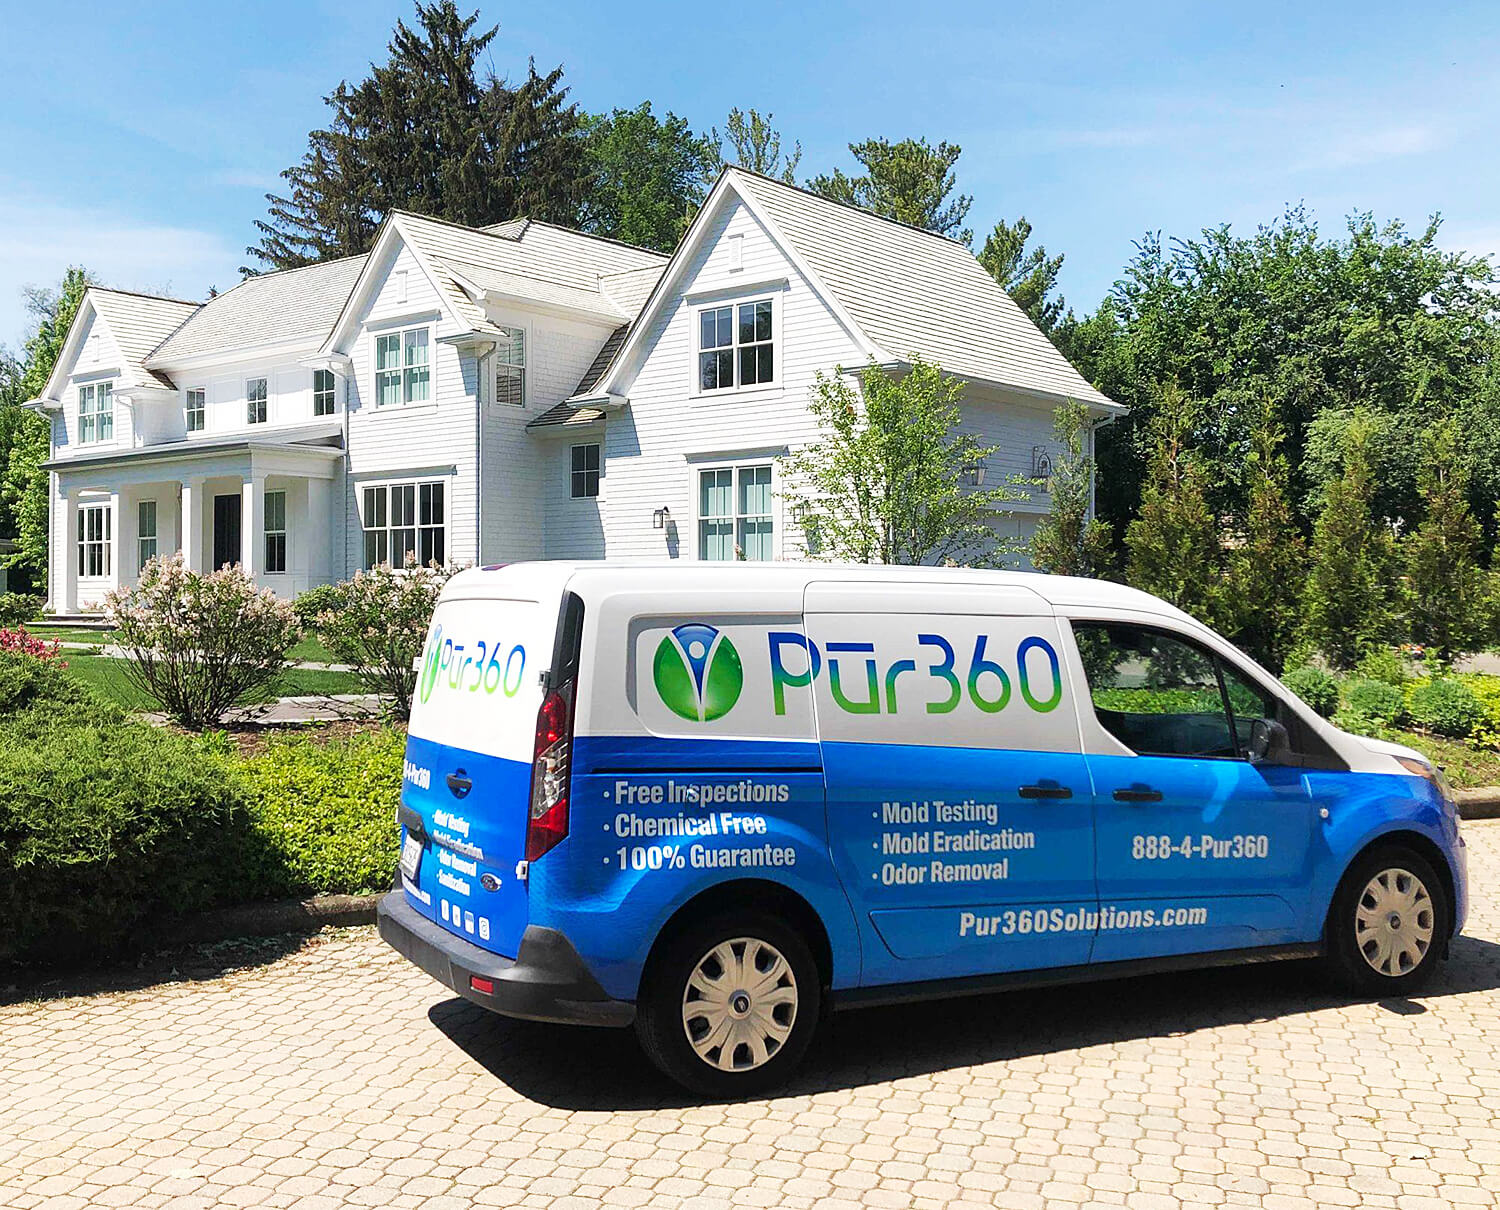 Pur360 service van parked on driveway outside a home